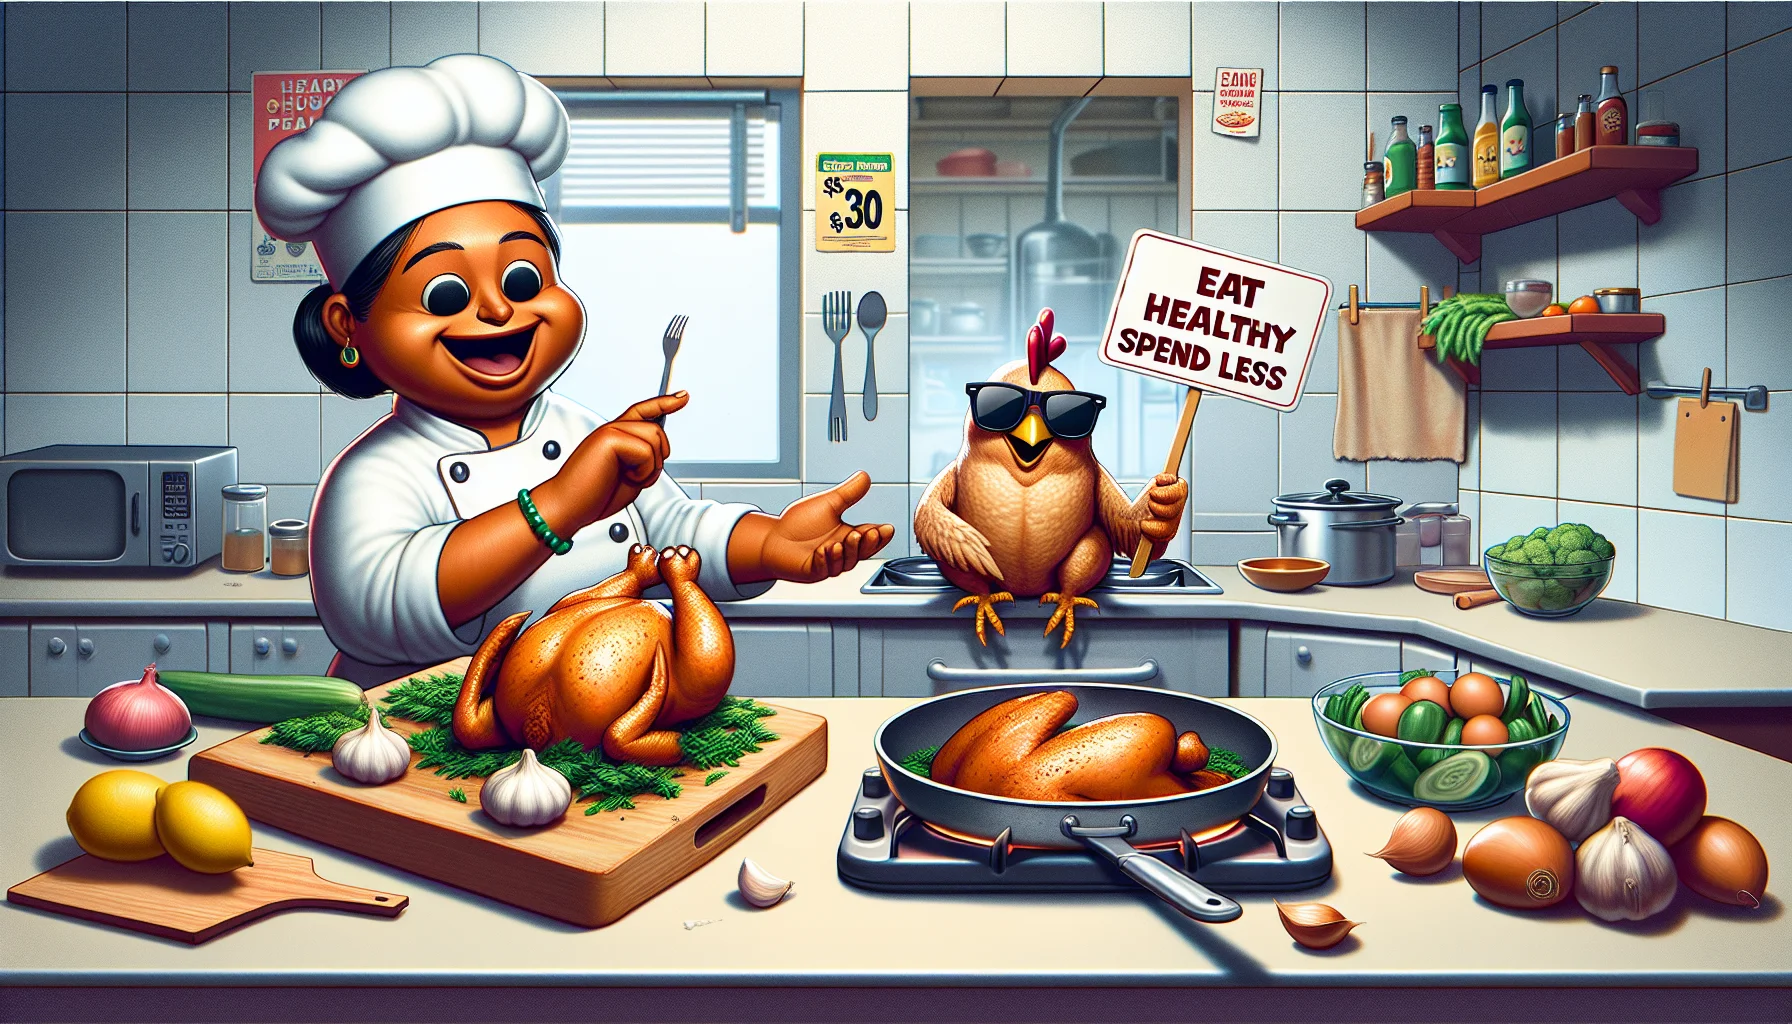 Create a humorous yet realistic image showcasing simple and cost-effective chicken roasting methods promoting healthier eating. The scene includes a female South Asian chef demonstrating how to perfectly roast a chicken in a small, well-equipped kitchen. The chicken wears sunglasses and holds a tiny sign saying 'Eat healthy, Spend less' in its wing. The signed is angled in such a way that it doesn't interfere with the roasting process. There are small price tags attached to healthy ingredients around the kitchen emphasizing cost-effectiveness, and a delightful energy is apparent which encourages viewers to adopt healthier habits.